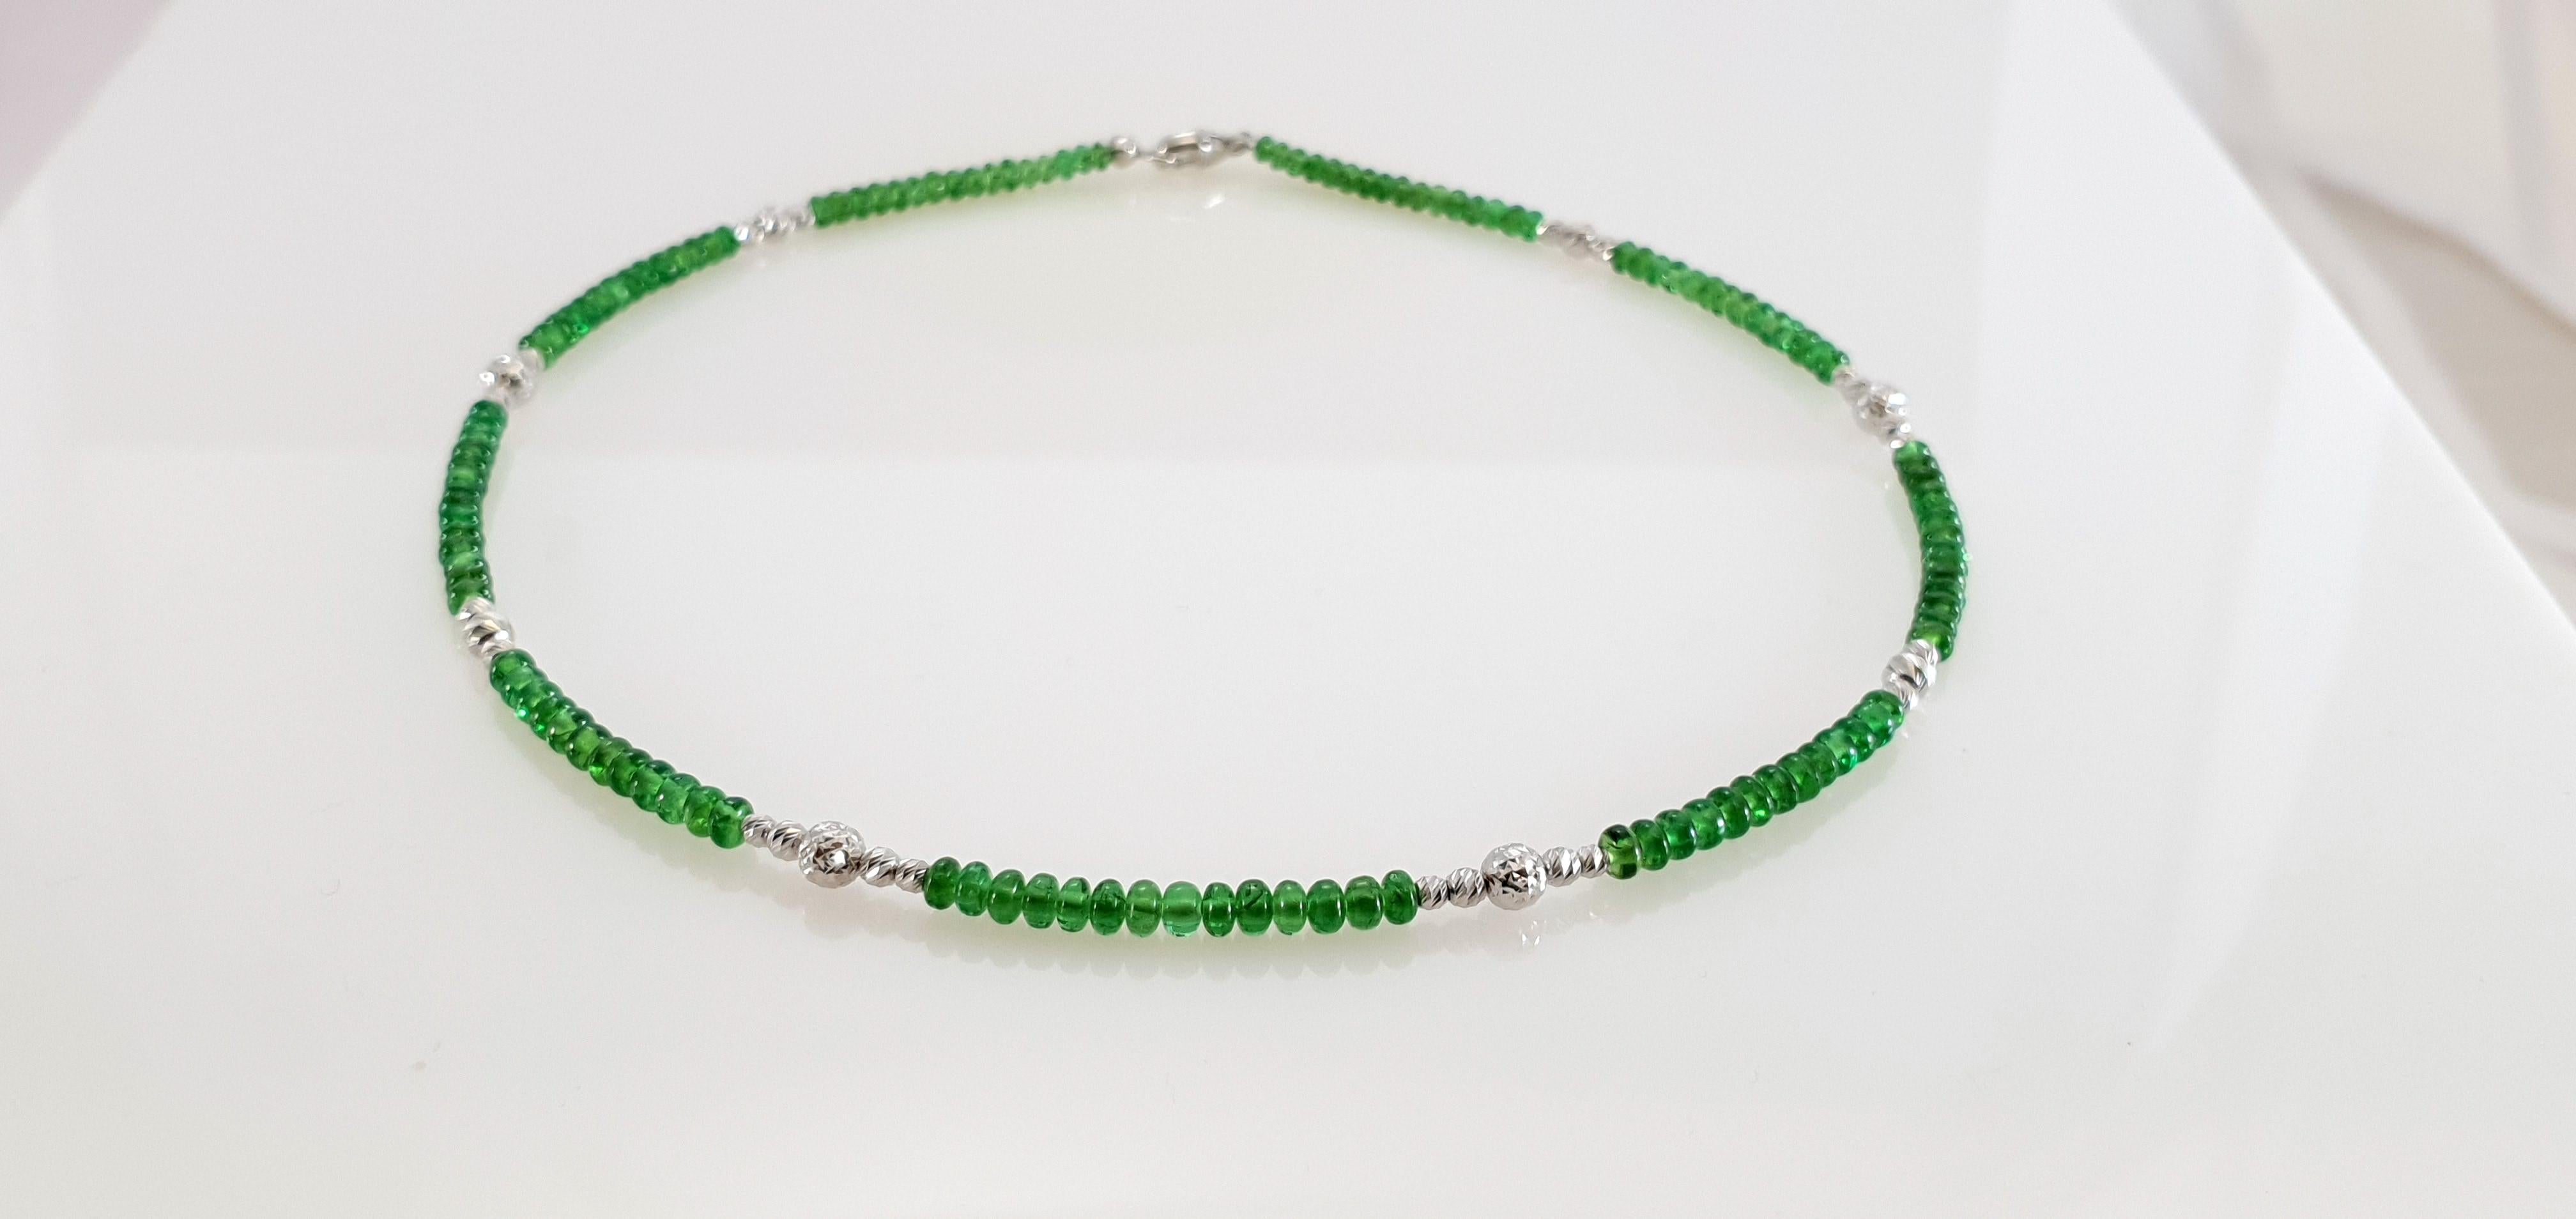 This Bright Green Tsavorite Rondel Beaded Necklace with 18 Carat White Gold is handmade. Cutting as well as goldwork are made in German quality. The screw clasp is easy to handle and very secure.
Timeless and classic design combined with bright